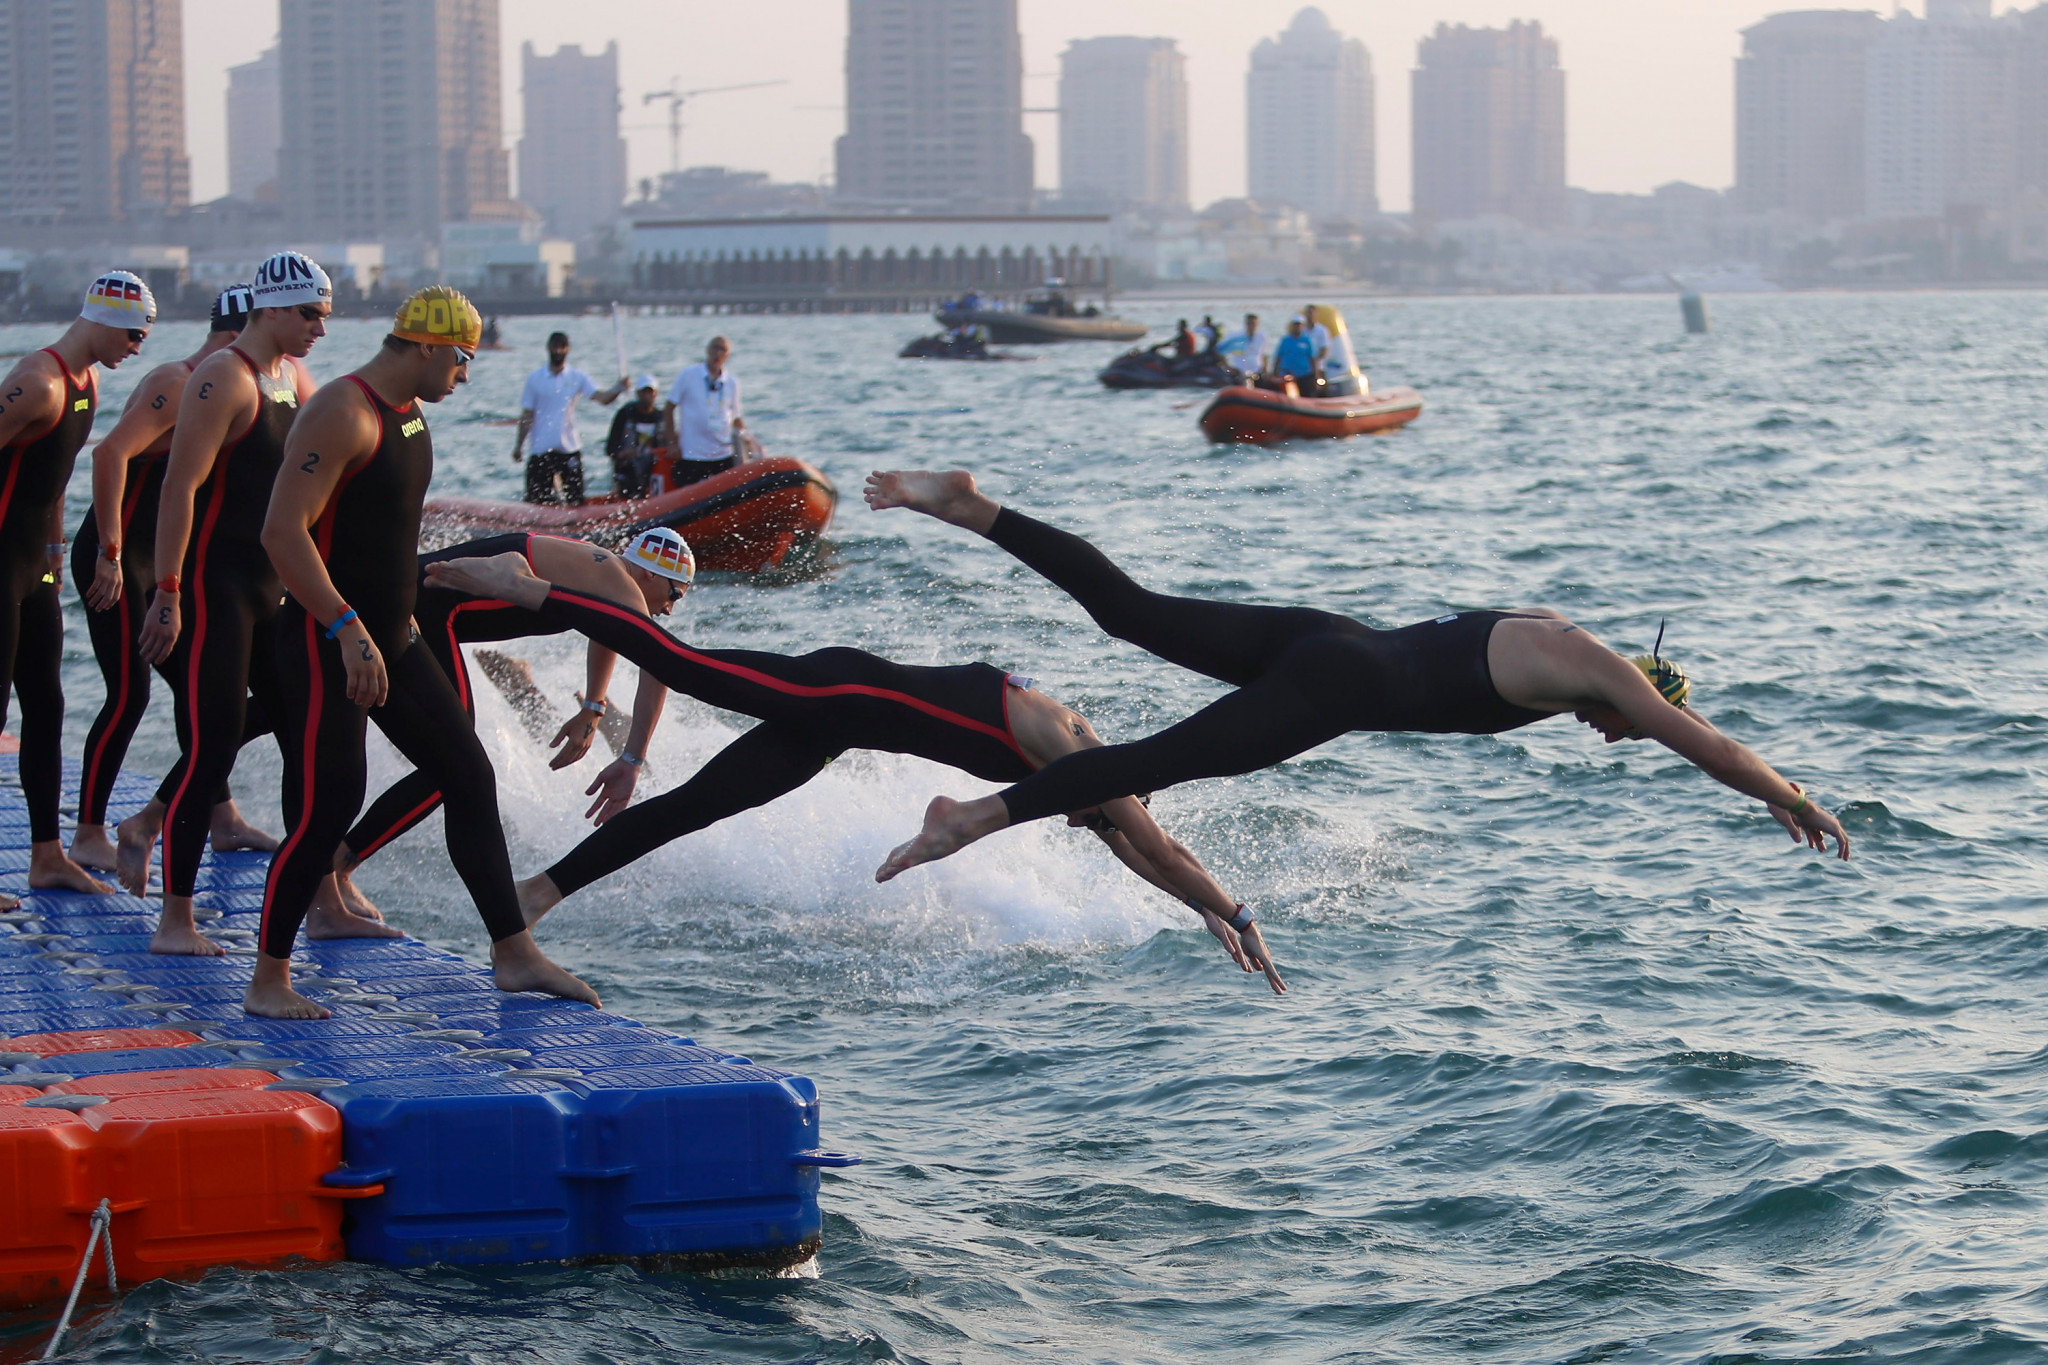 Open water swimming provided the first gold medal of the ANOC World Beach Games in Doha ©ANOC World Beach Games